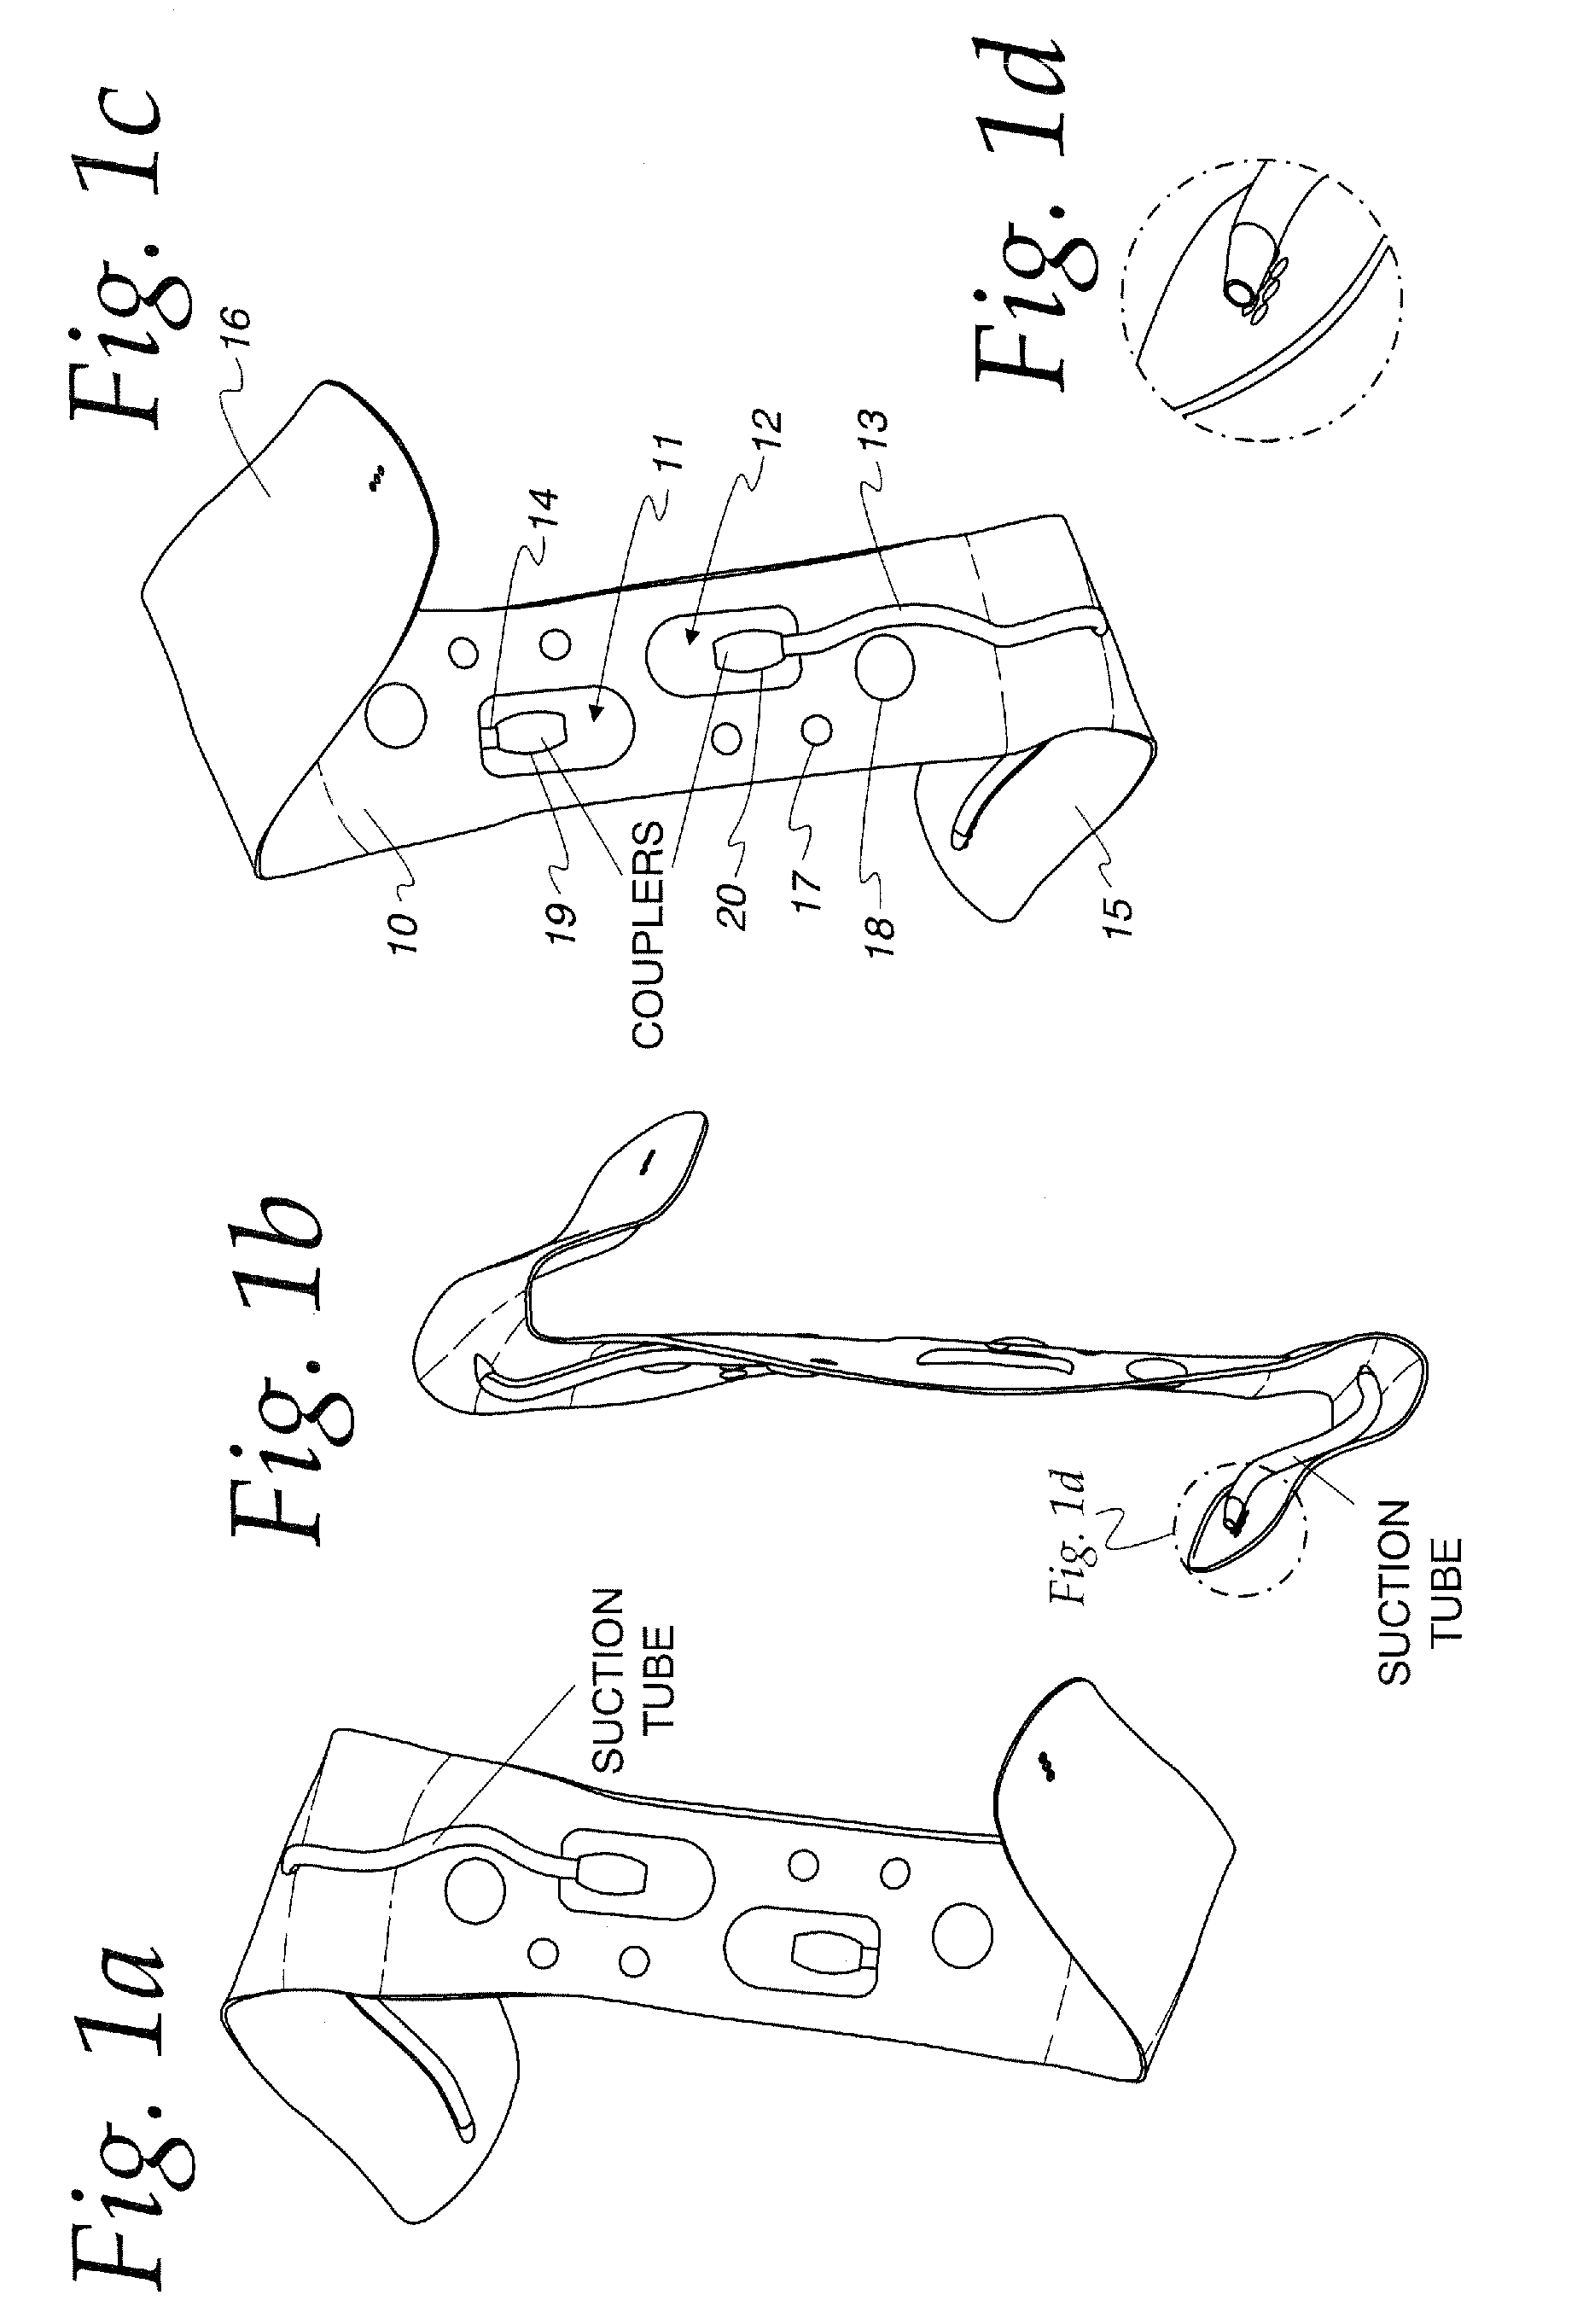 Surgical instruments and methods of use